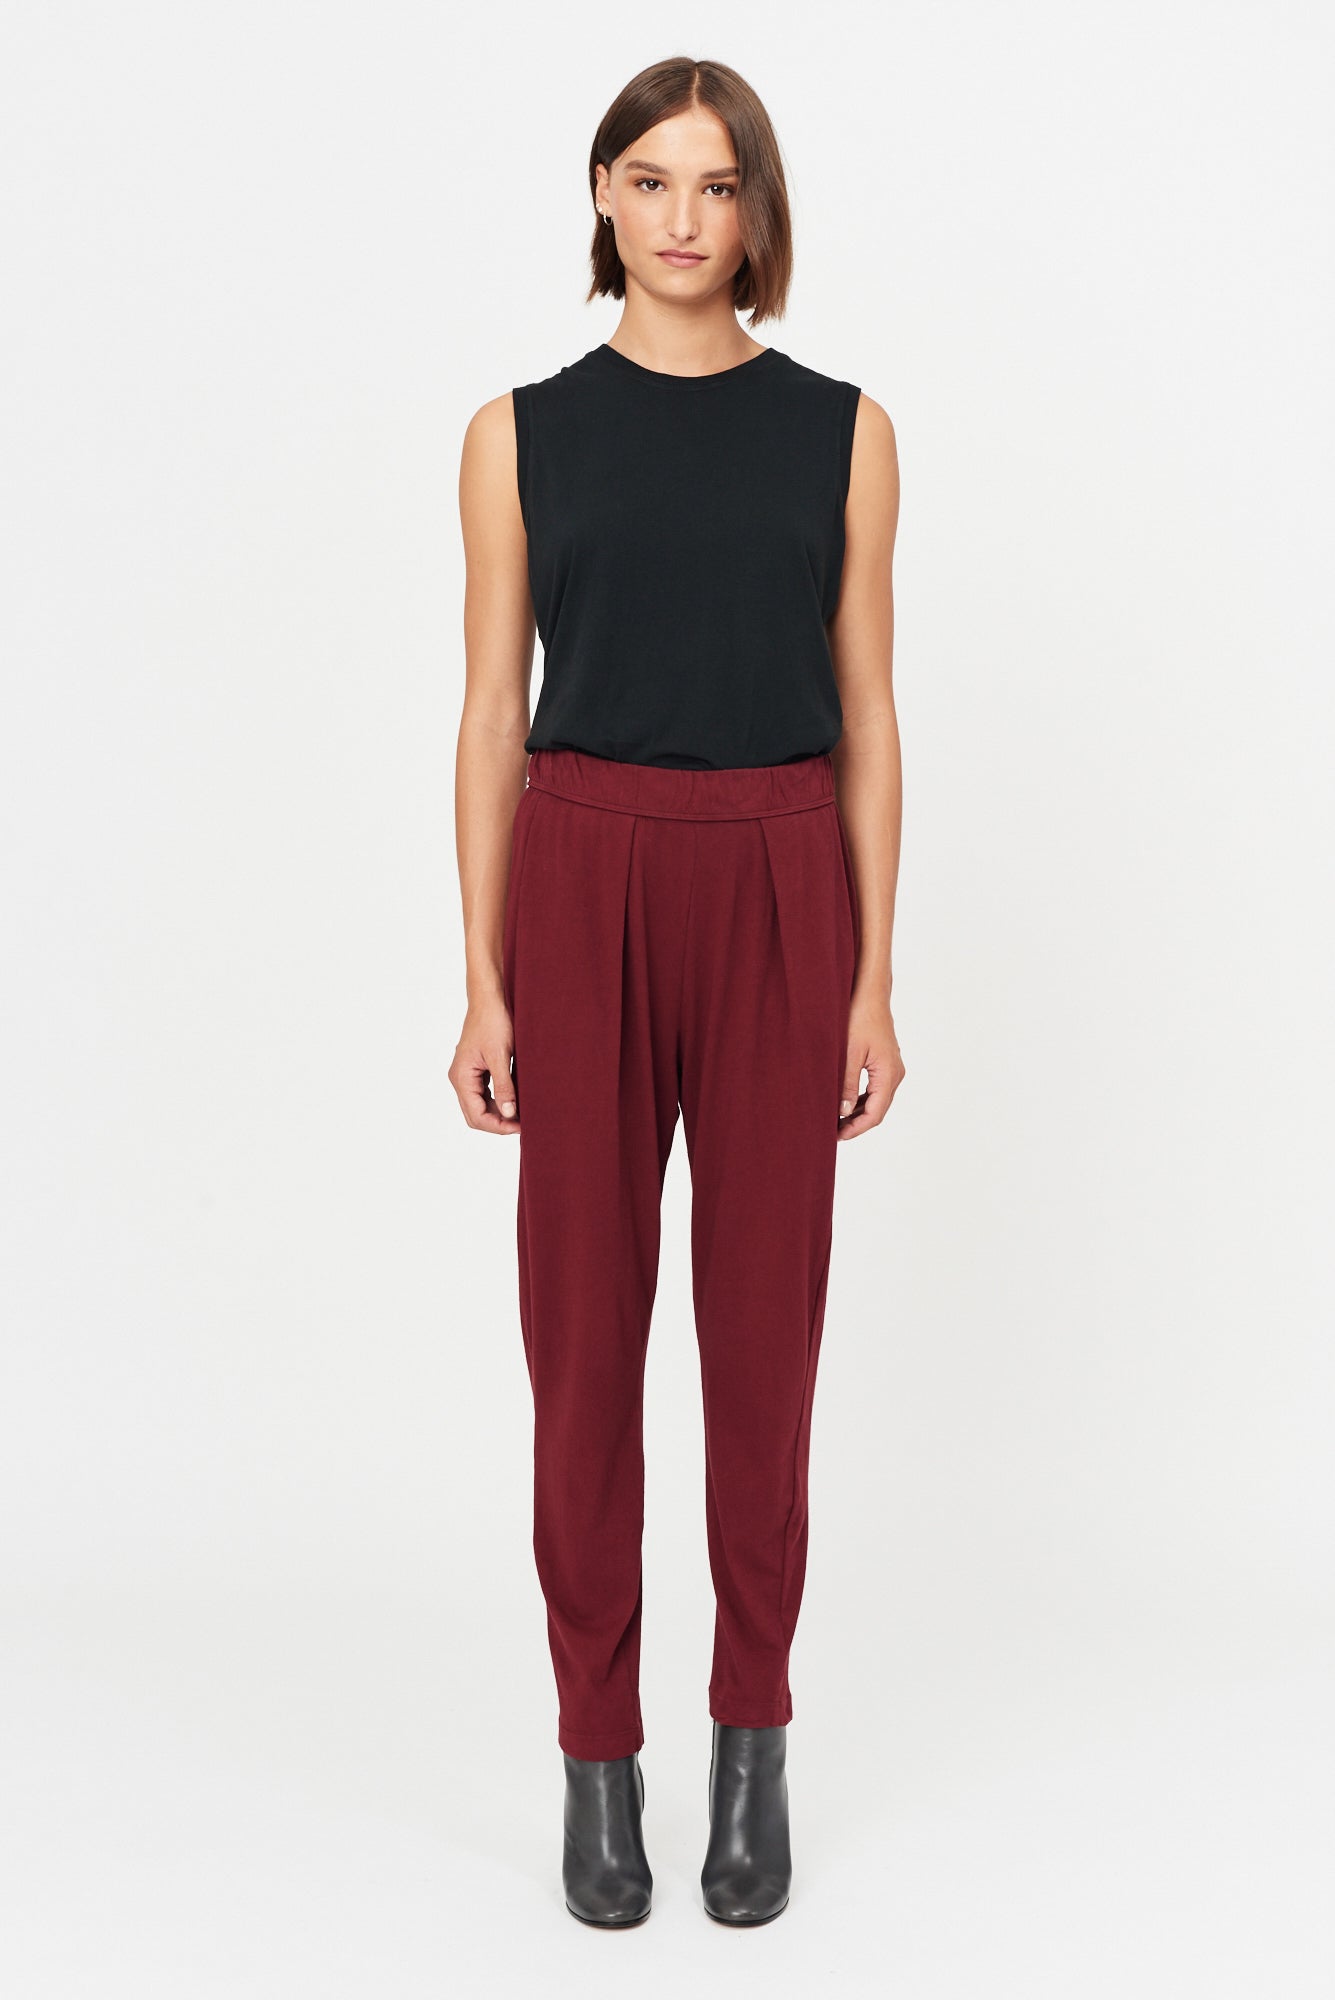 Sienna Classic Jersey Easy Pant Full Front View